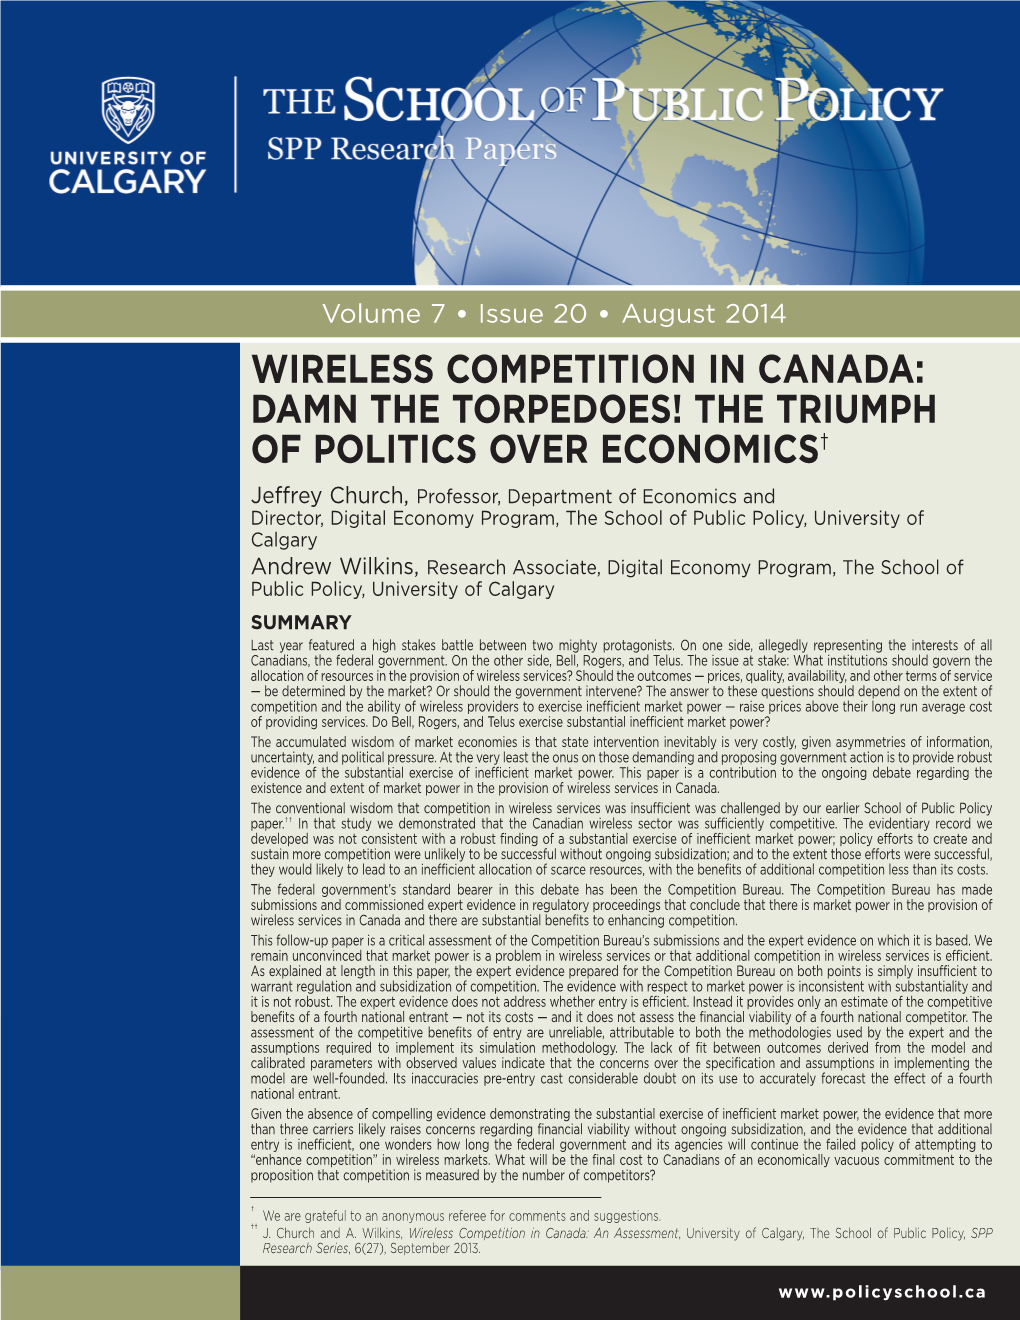 Wireless Competition in Canada